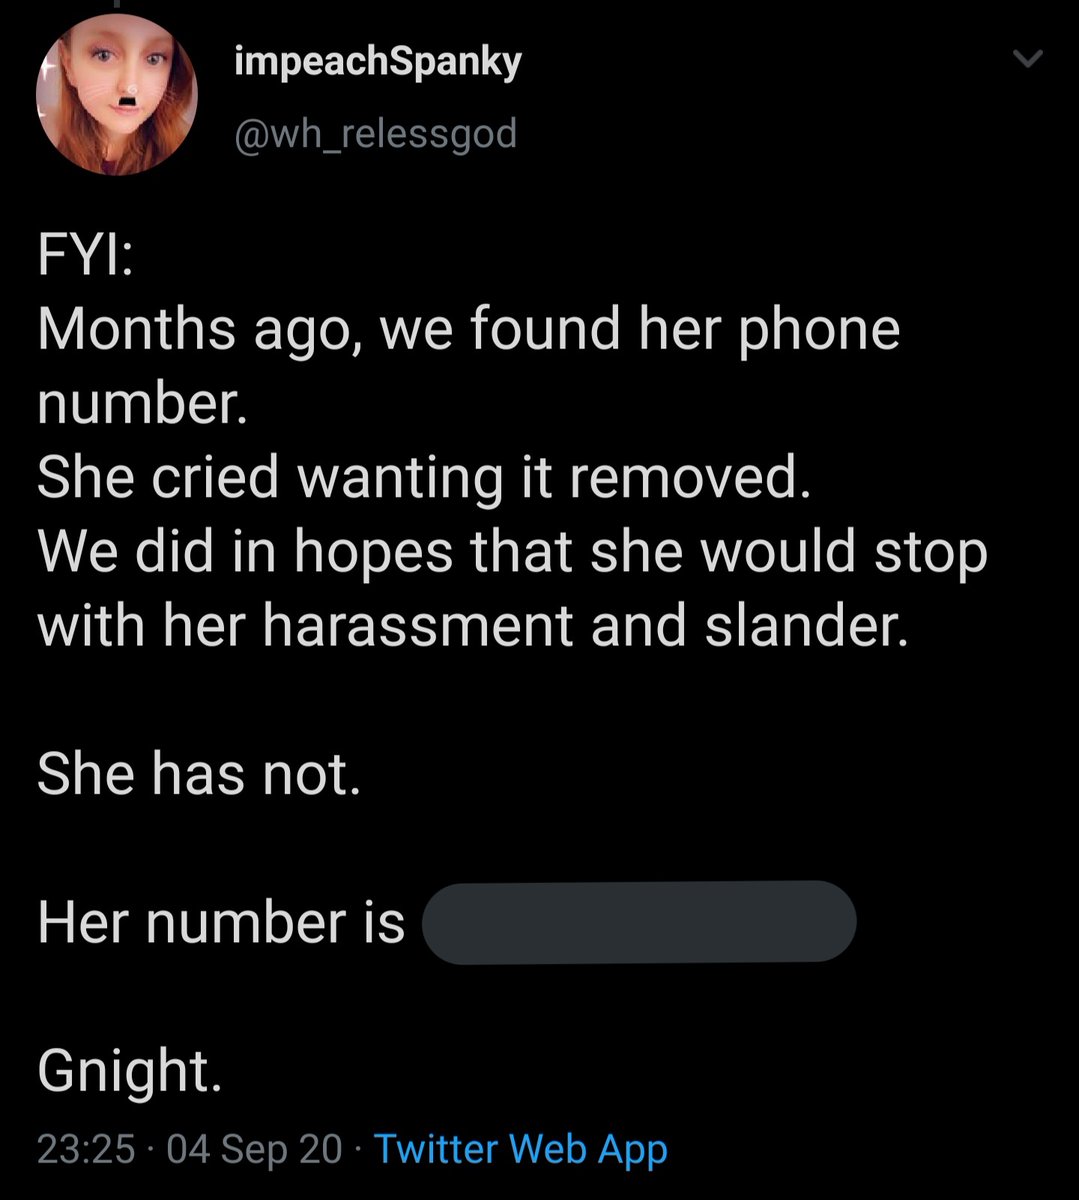 Apparently that wasn't enough for this person and they decided to post her phone number publicly, they admit they posted it publicly months ago but now they reposted it, she recieved a text from a Google voice # last night threatening her due to this:  https://twitter.com/Godlesswh_re/status/1302228198151815170?s=19